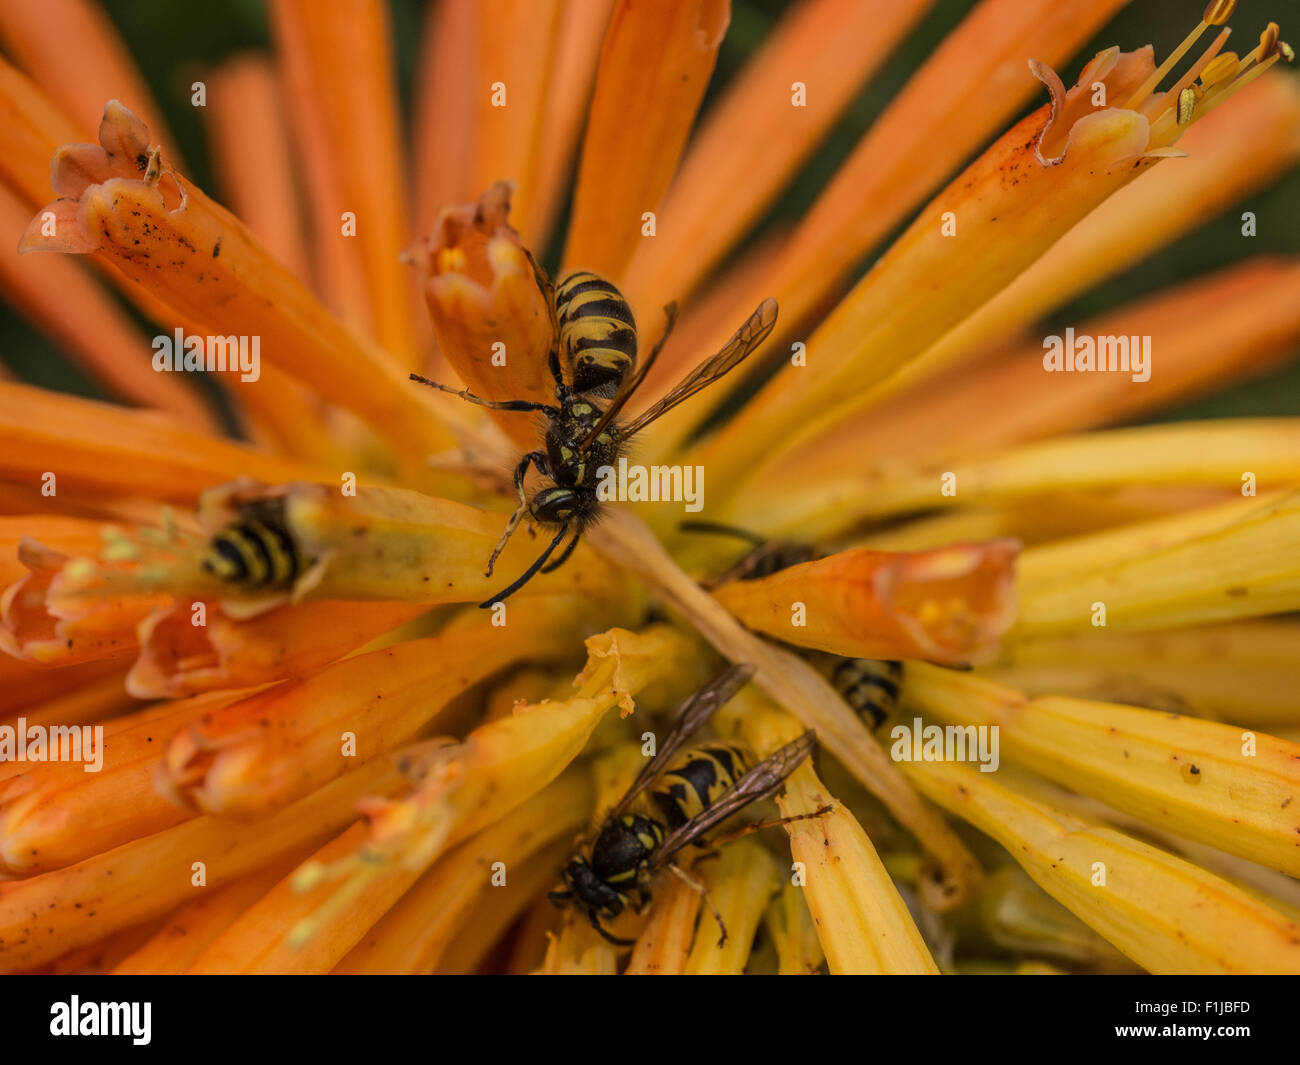 A group of Vespula Vulgaris or common wasp gathering pollen. Stock Photo